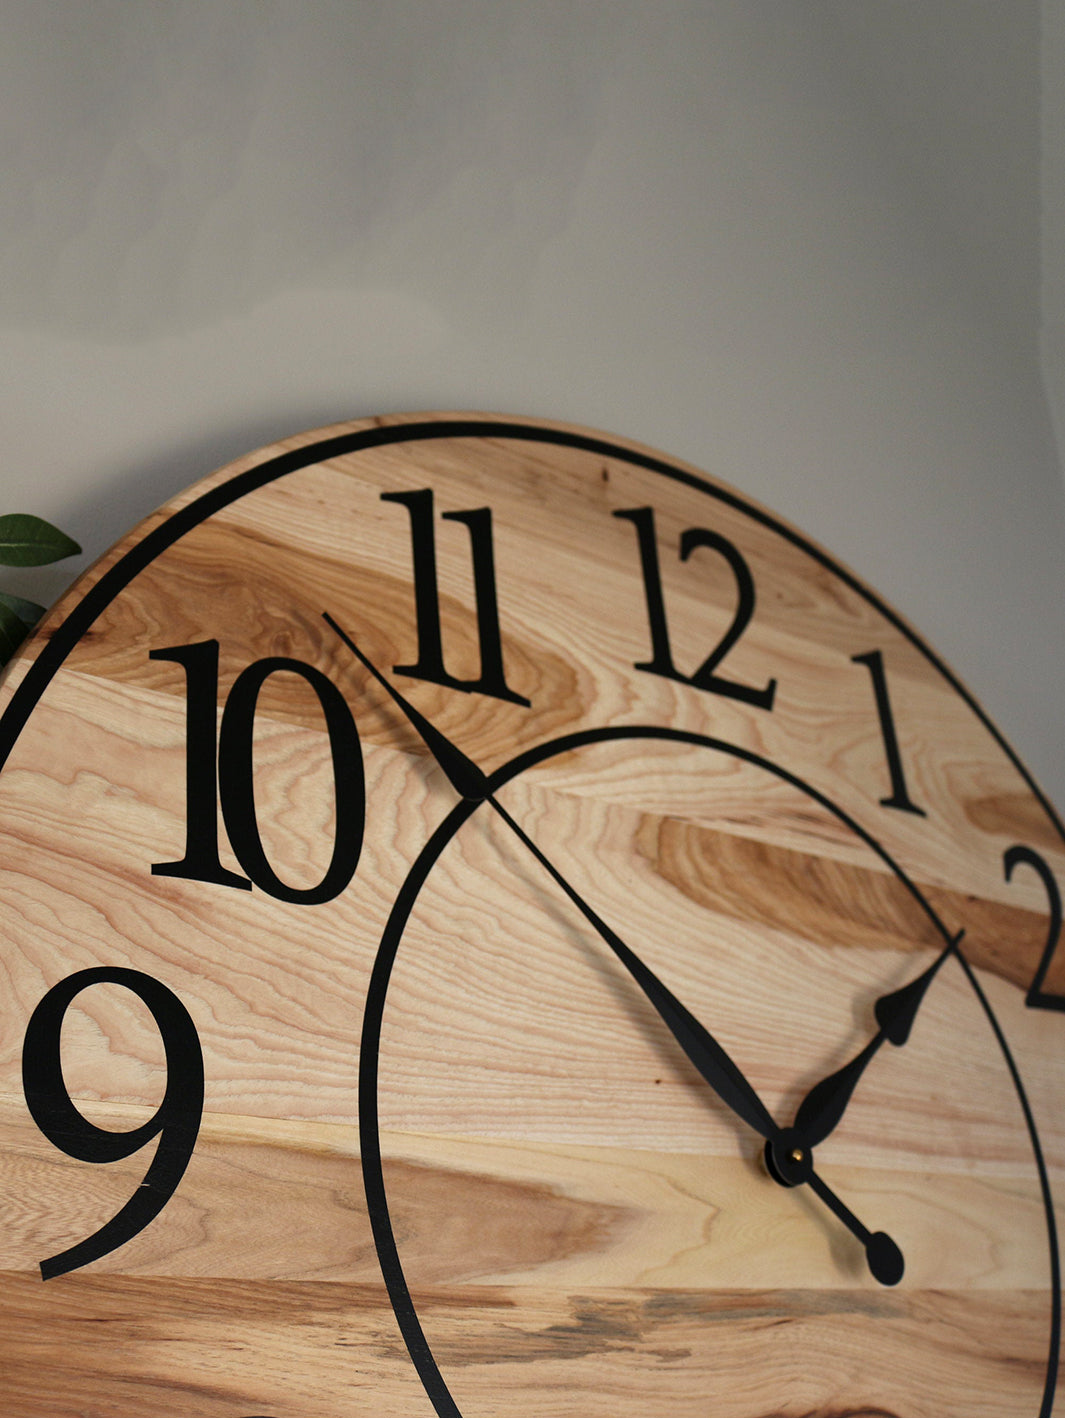 Solid Hickory Wood Wall Clock with Numbers and Lines Earthly Comfort Clocks 590-5